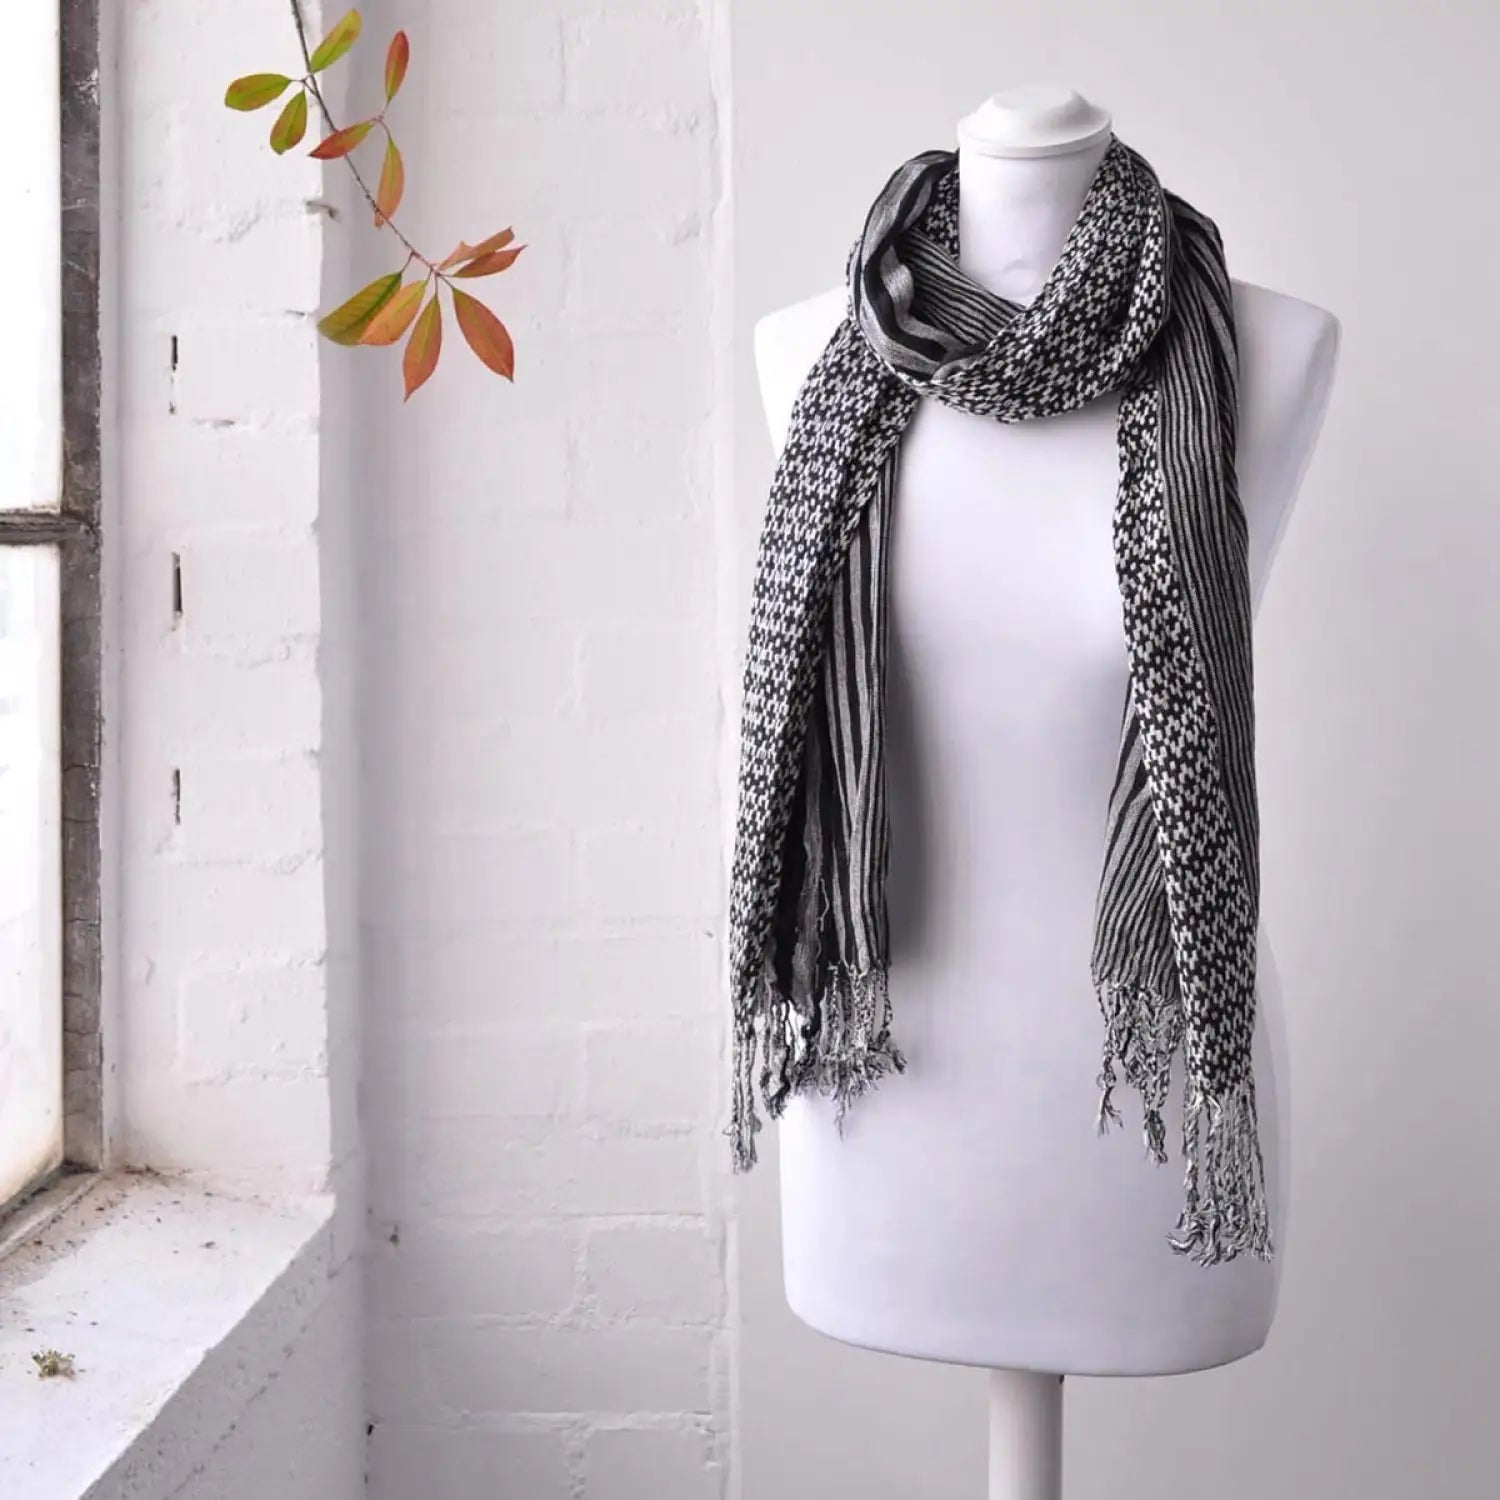 Elegant Striped Woven Winter Scarf on Mannequin